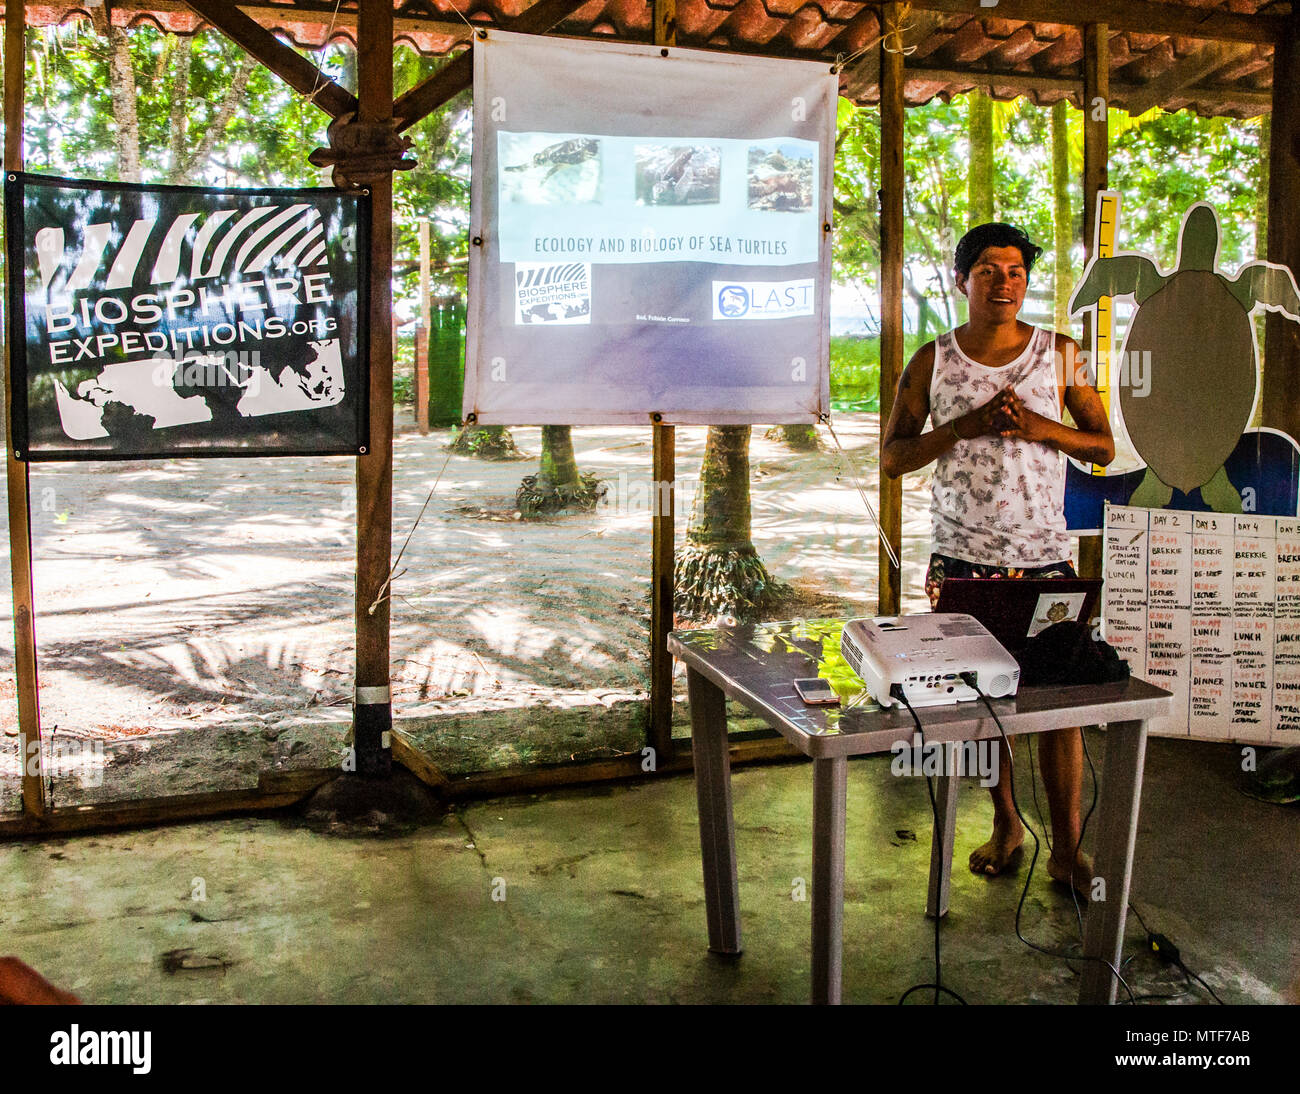 Lecture at Biosphere citizen science project for sea turtles protection in Costa Rica Stock Photo